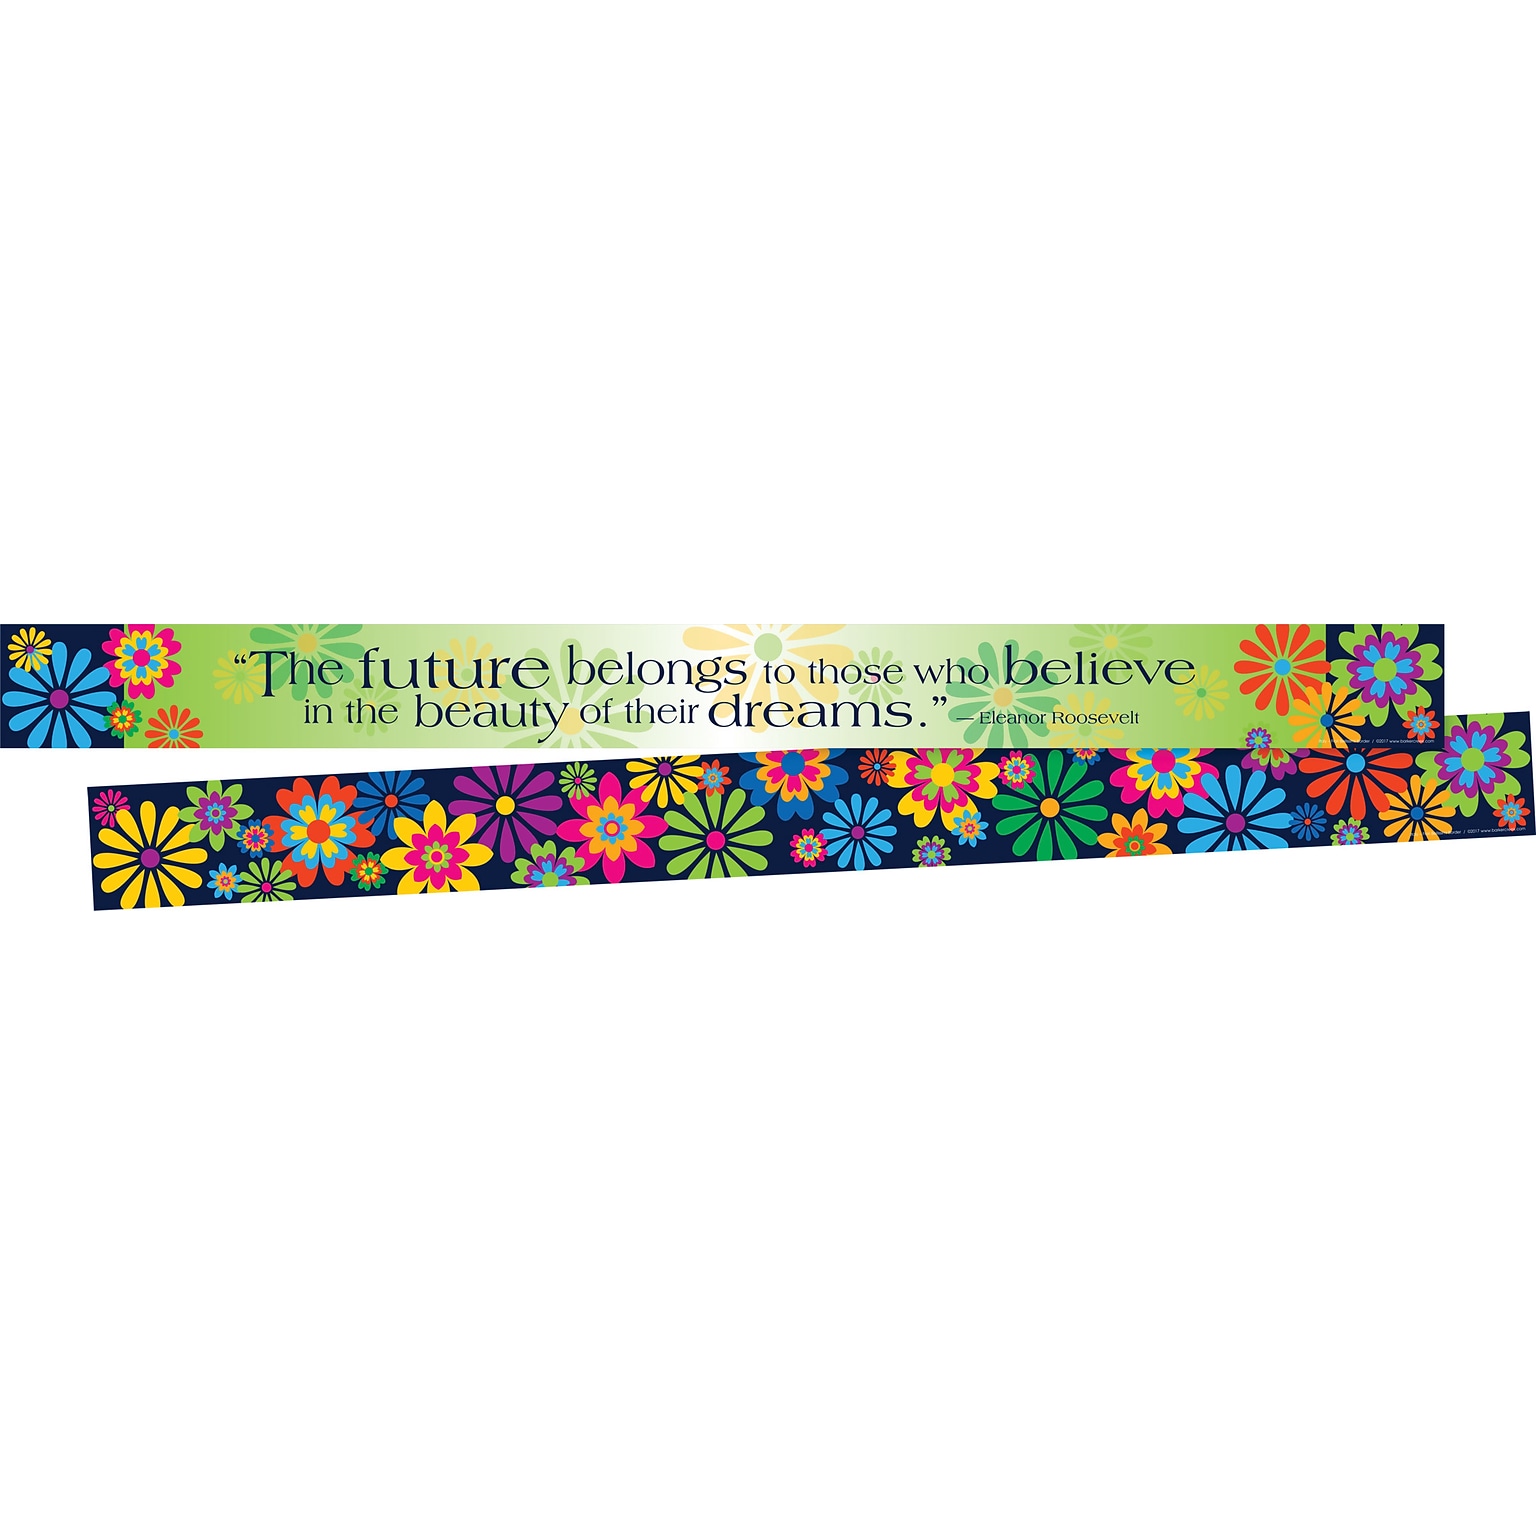 Barker Creek Italy Fiori Bellissimi Double-Sided Border with Quote 2-Pack, 70 Feet/Set (BC3671)